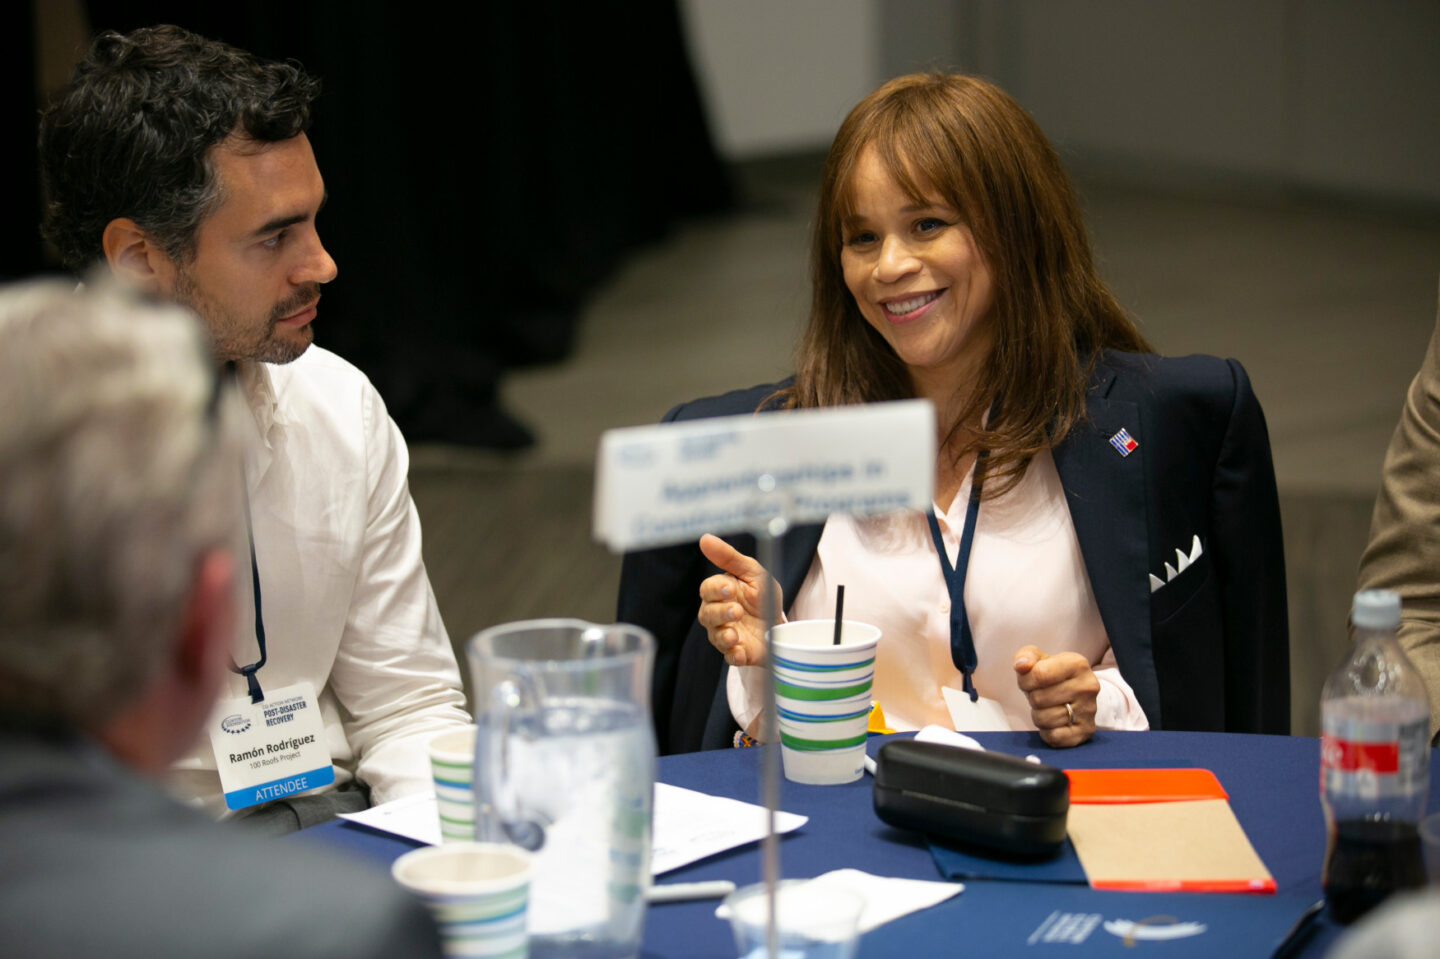 Rosie Perez participates in a working group discussion